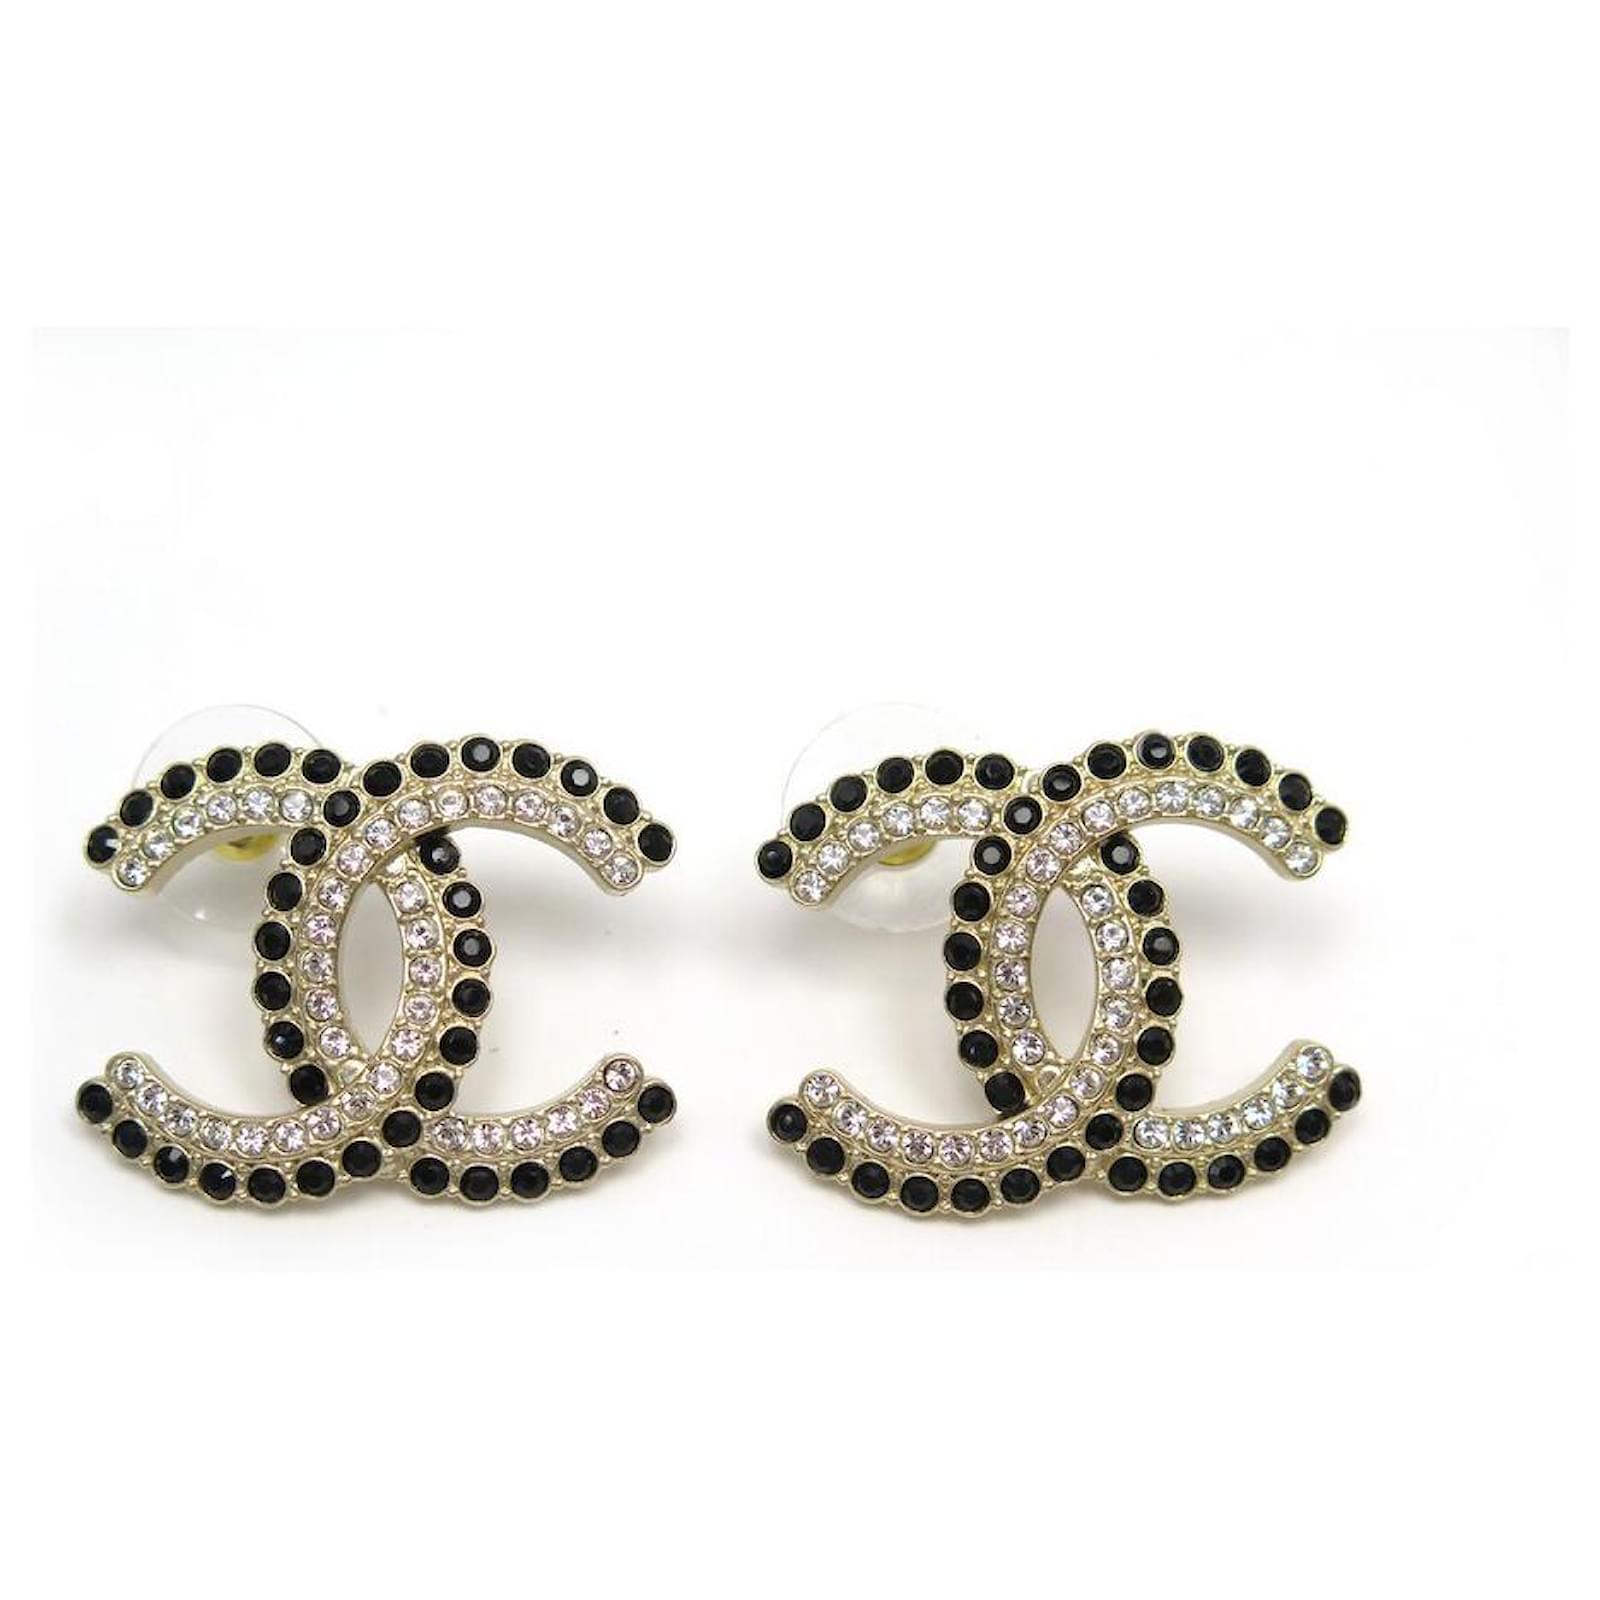 NEW EARRINGS CHANEL LOGO CC lined ROW BLACK & WHITE STRASS